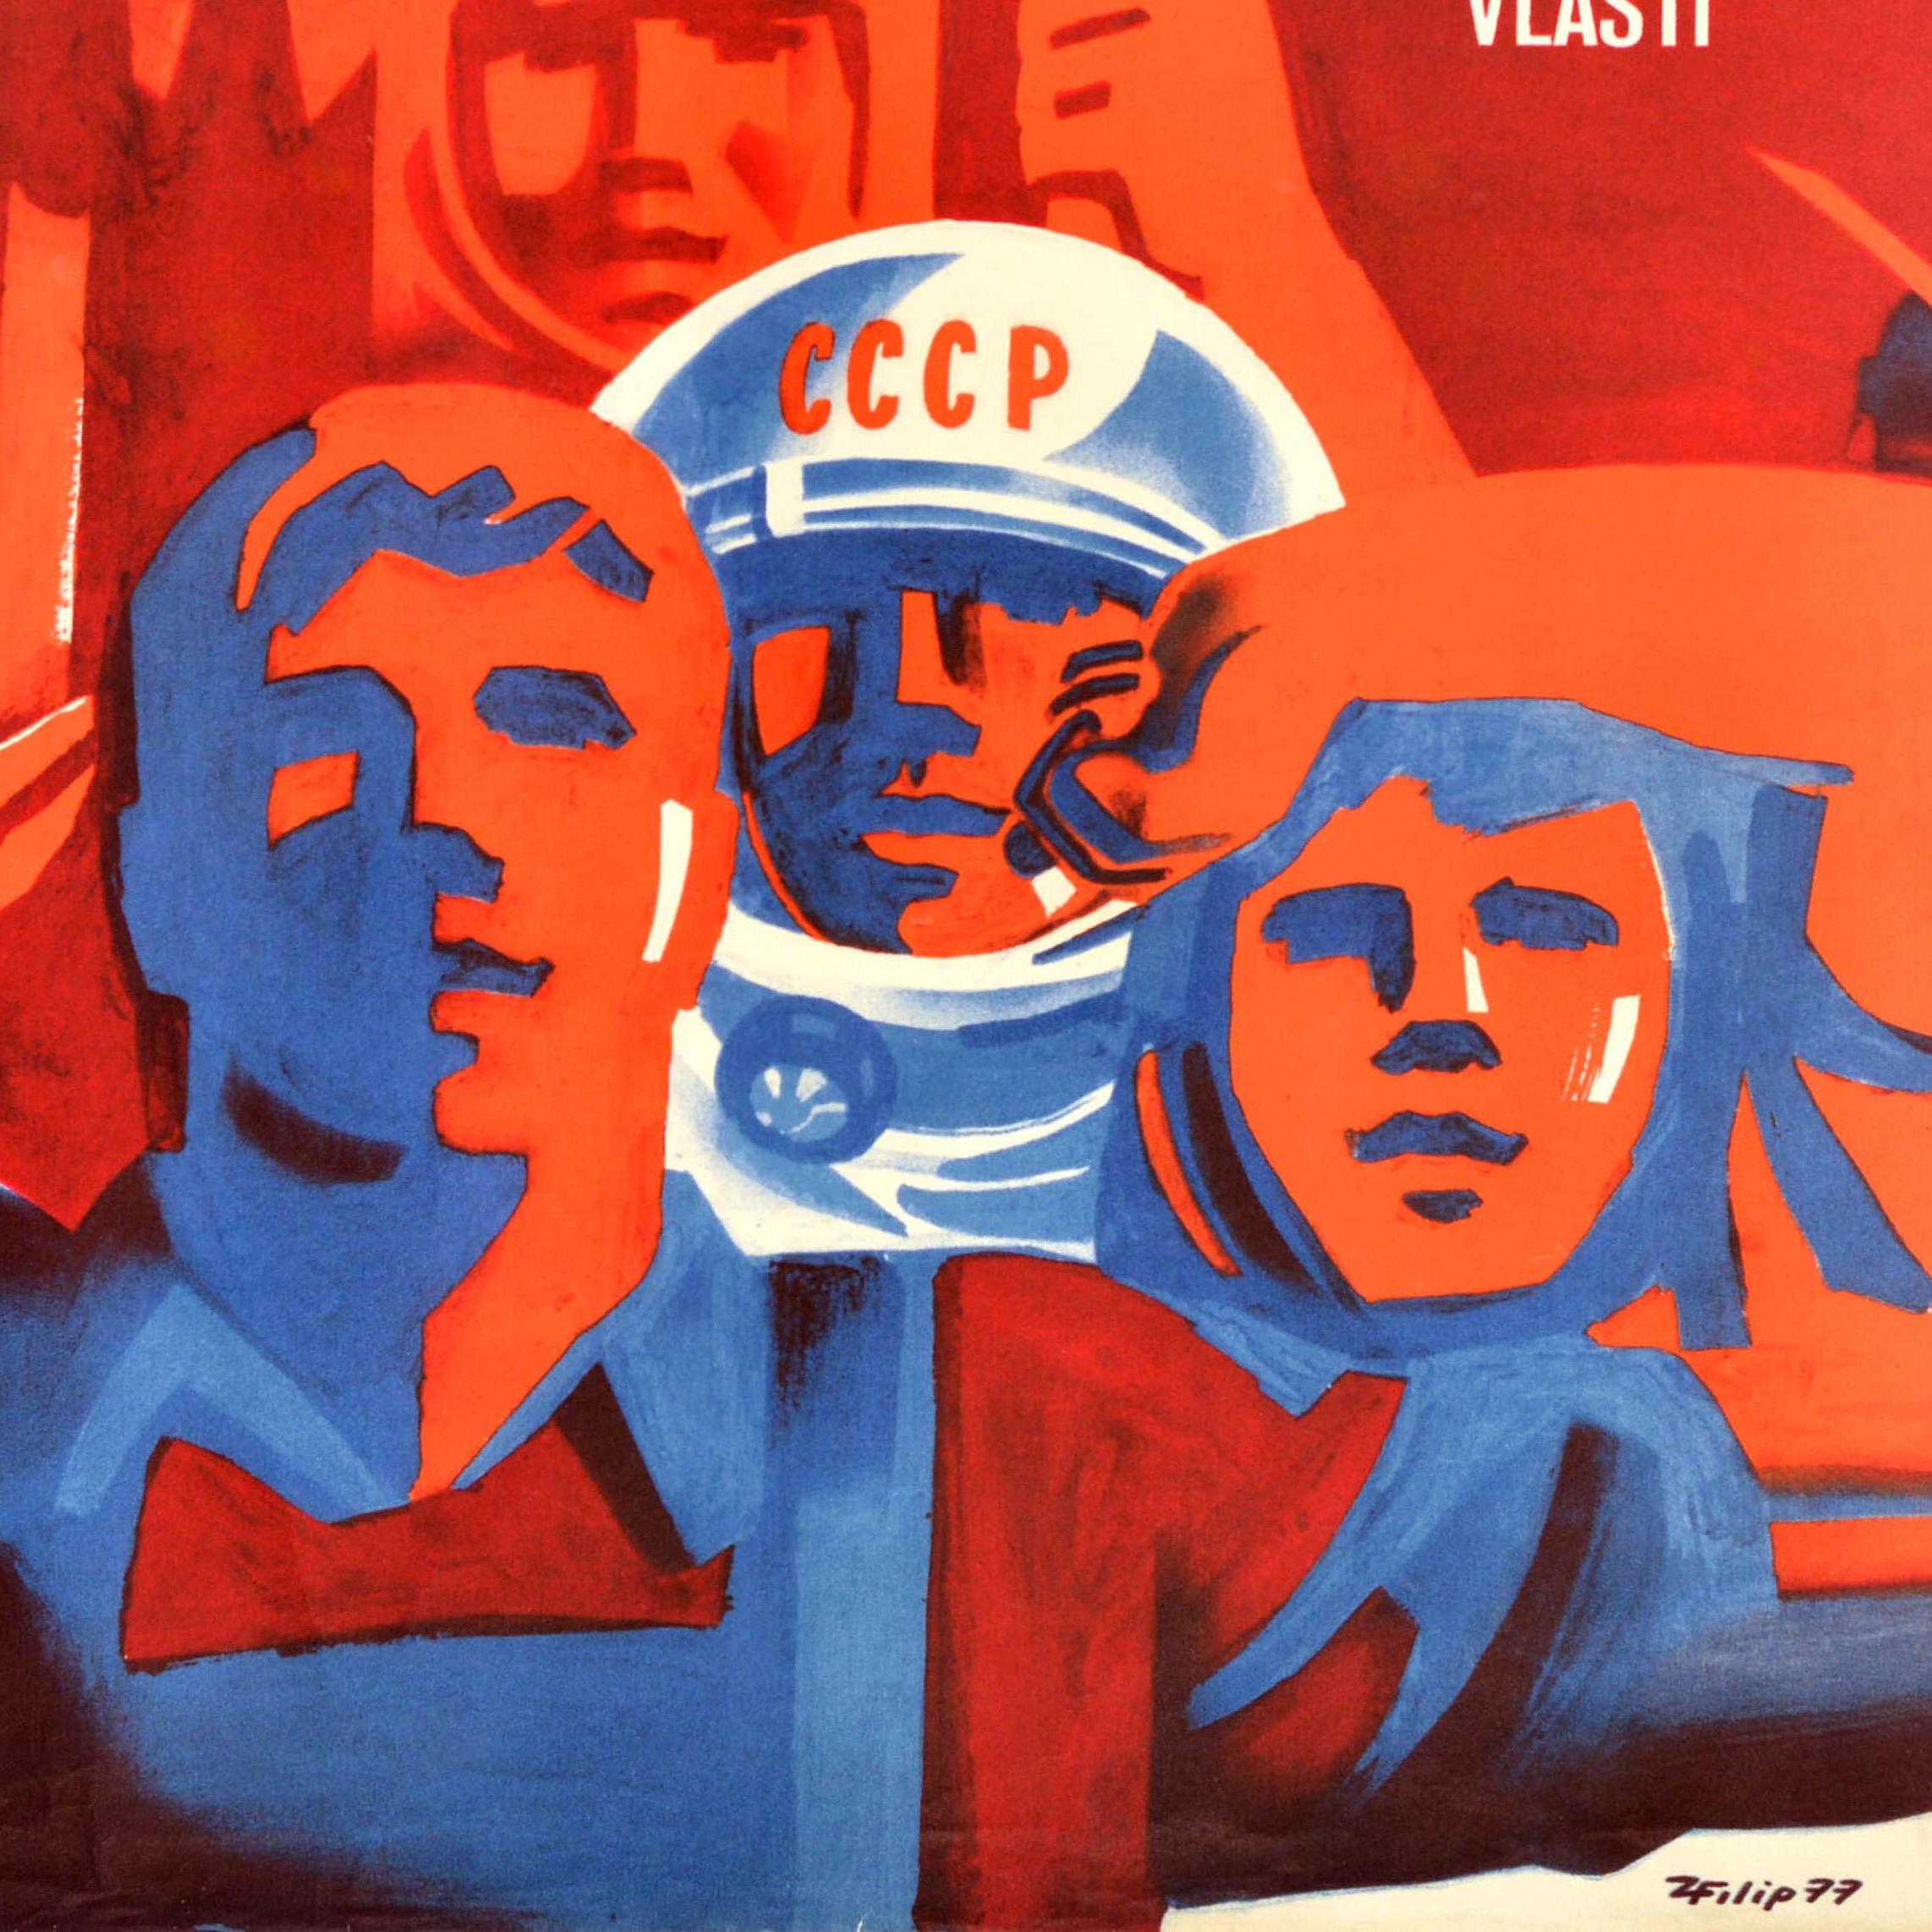 Original vintage Soviet propaganda poster commemorating the anniversary of the October Revolution featuring an illustration of a worker in overalls holding a red banner and a hammer and sickle, a cosmonaut in a space helmet marked CCCP / USSR and a